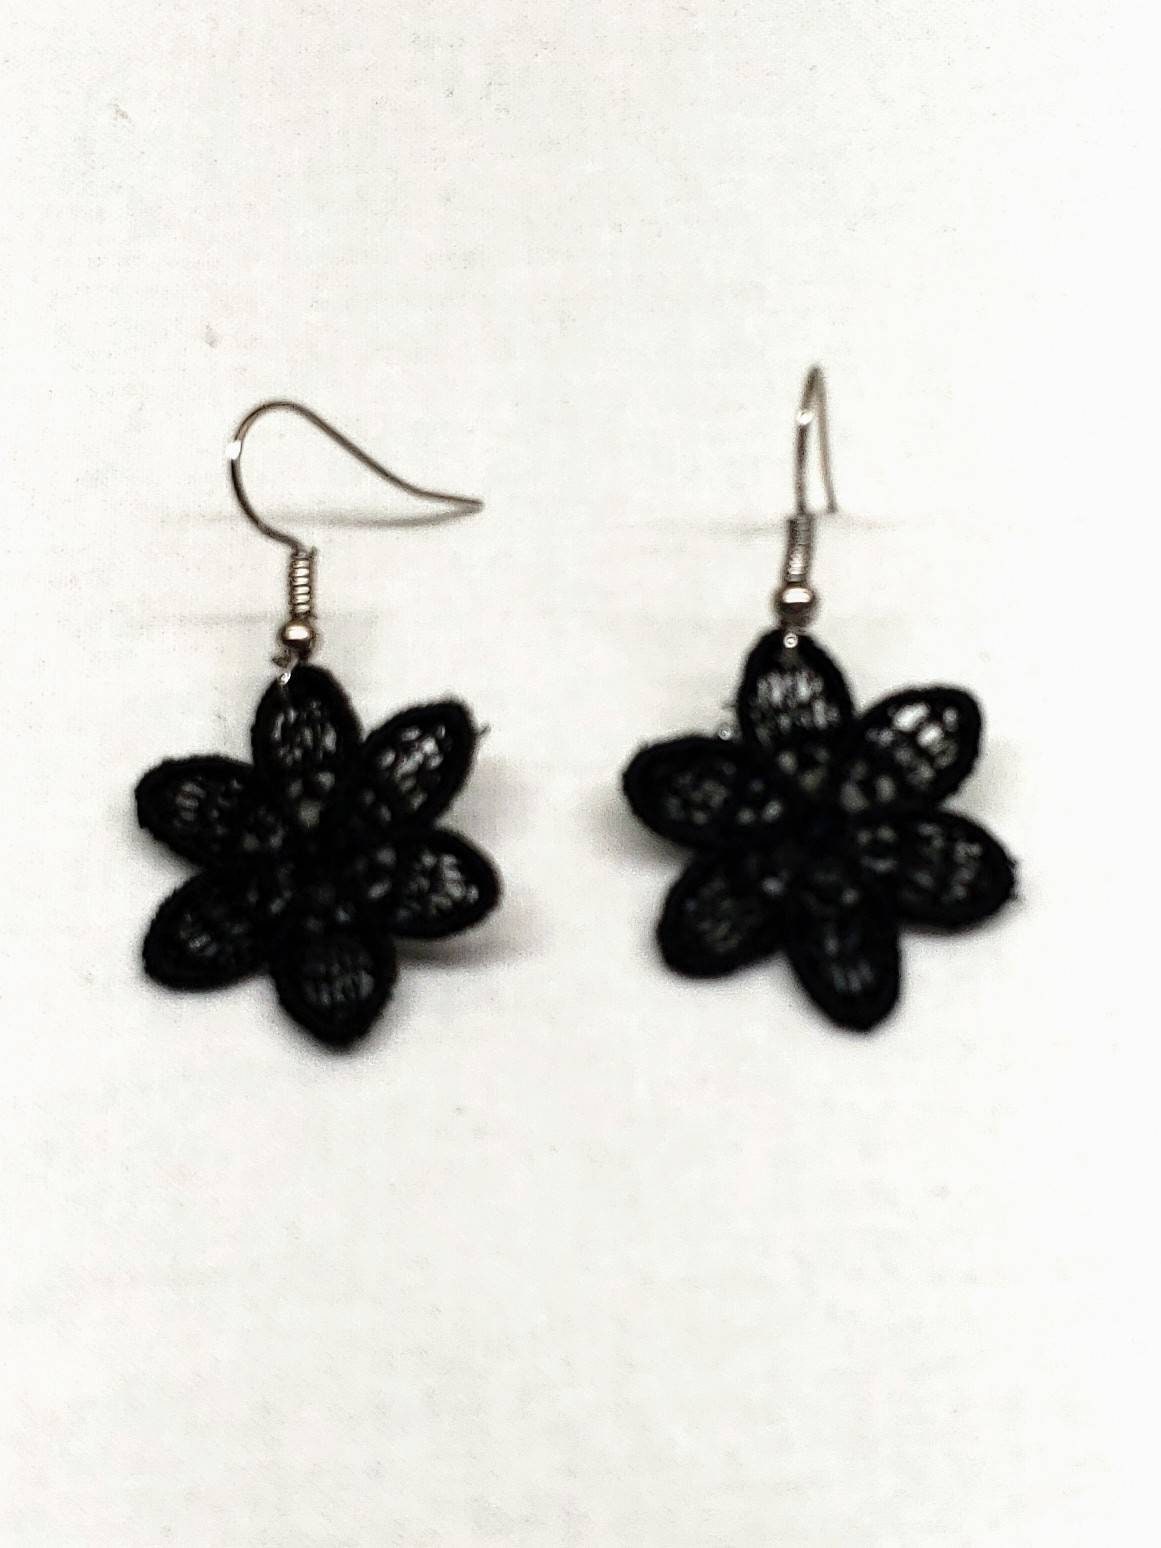 Flower Free Standing Lace Earrings Black Embroidery Thread | Etsy